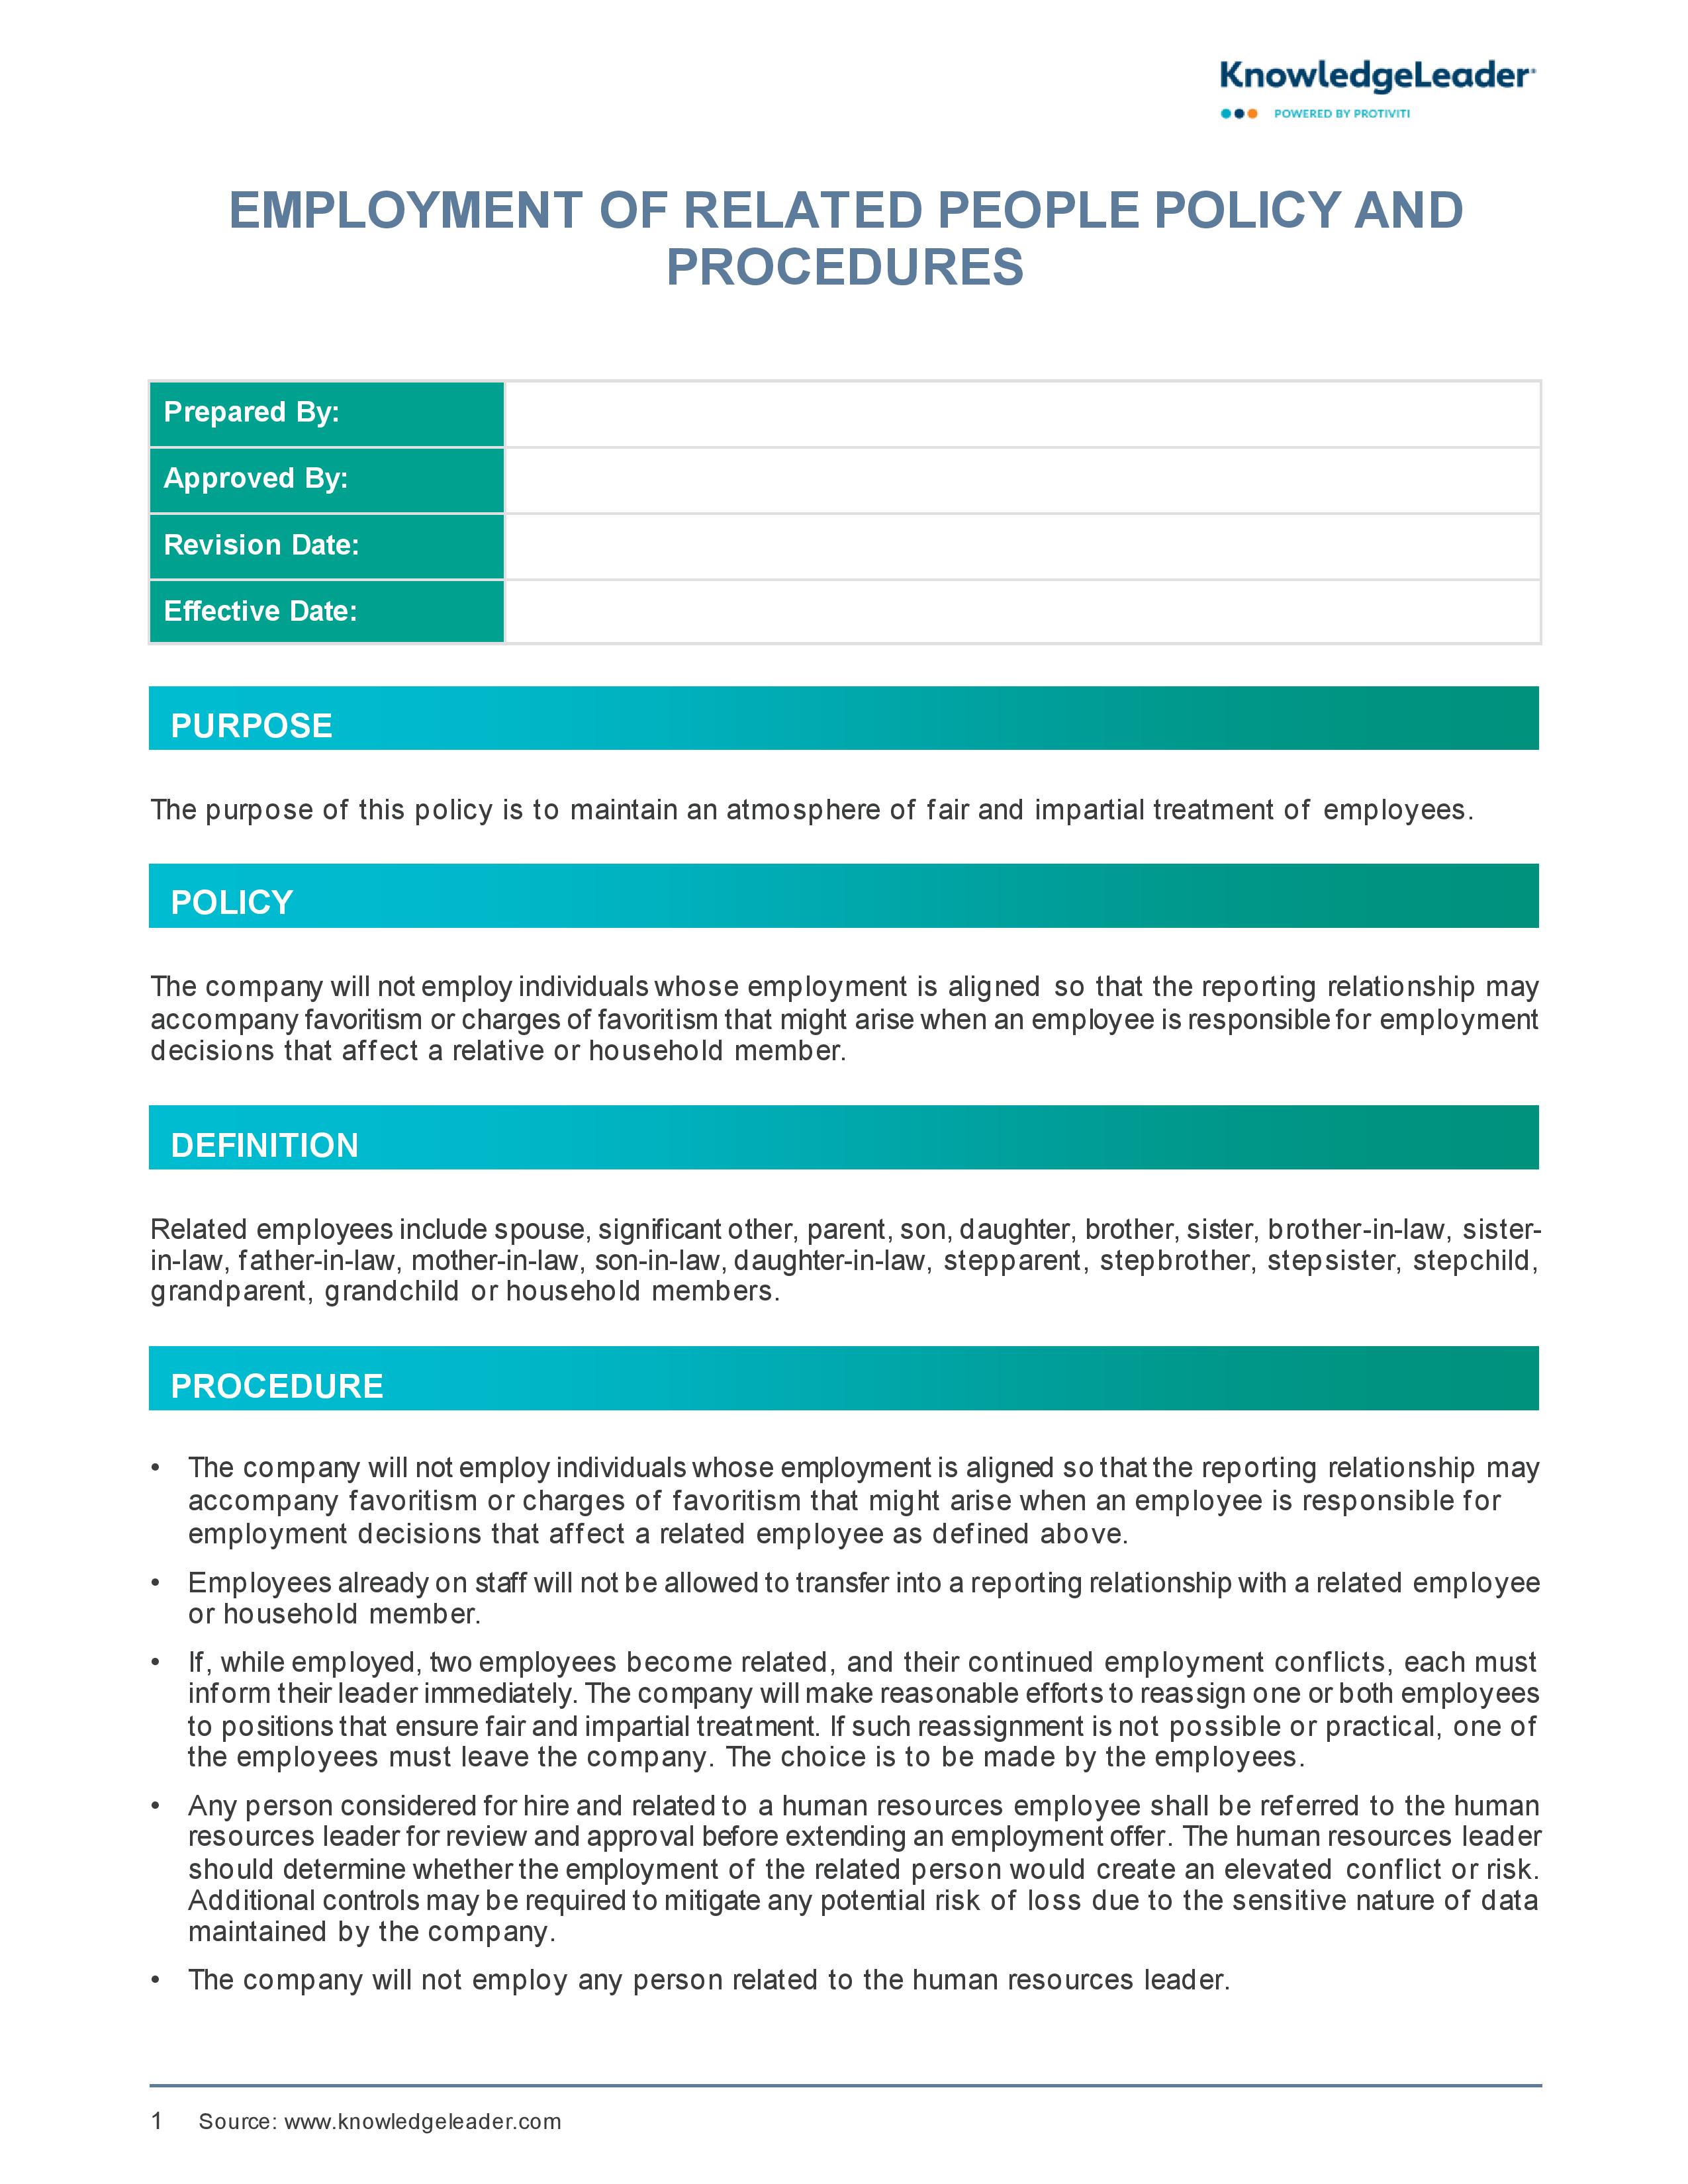 Screenshot of the first page of Employment of Related People Policy and Procedures